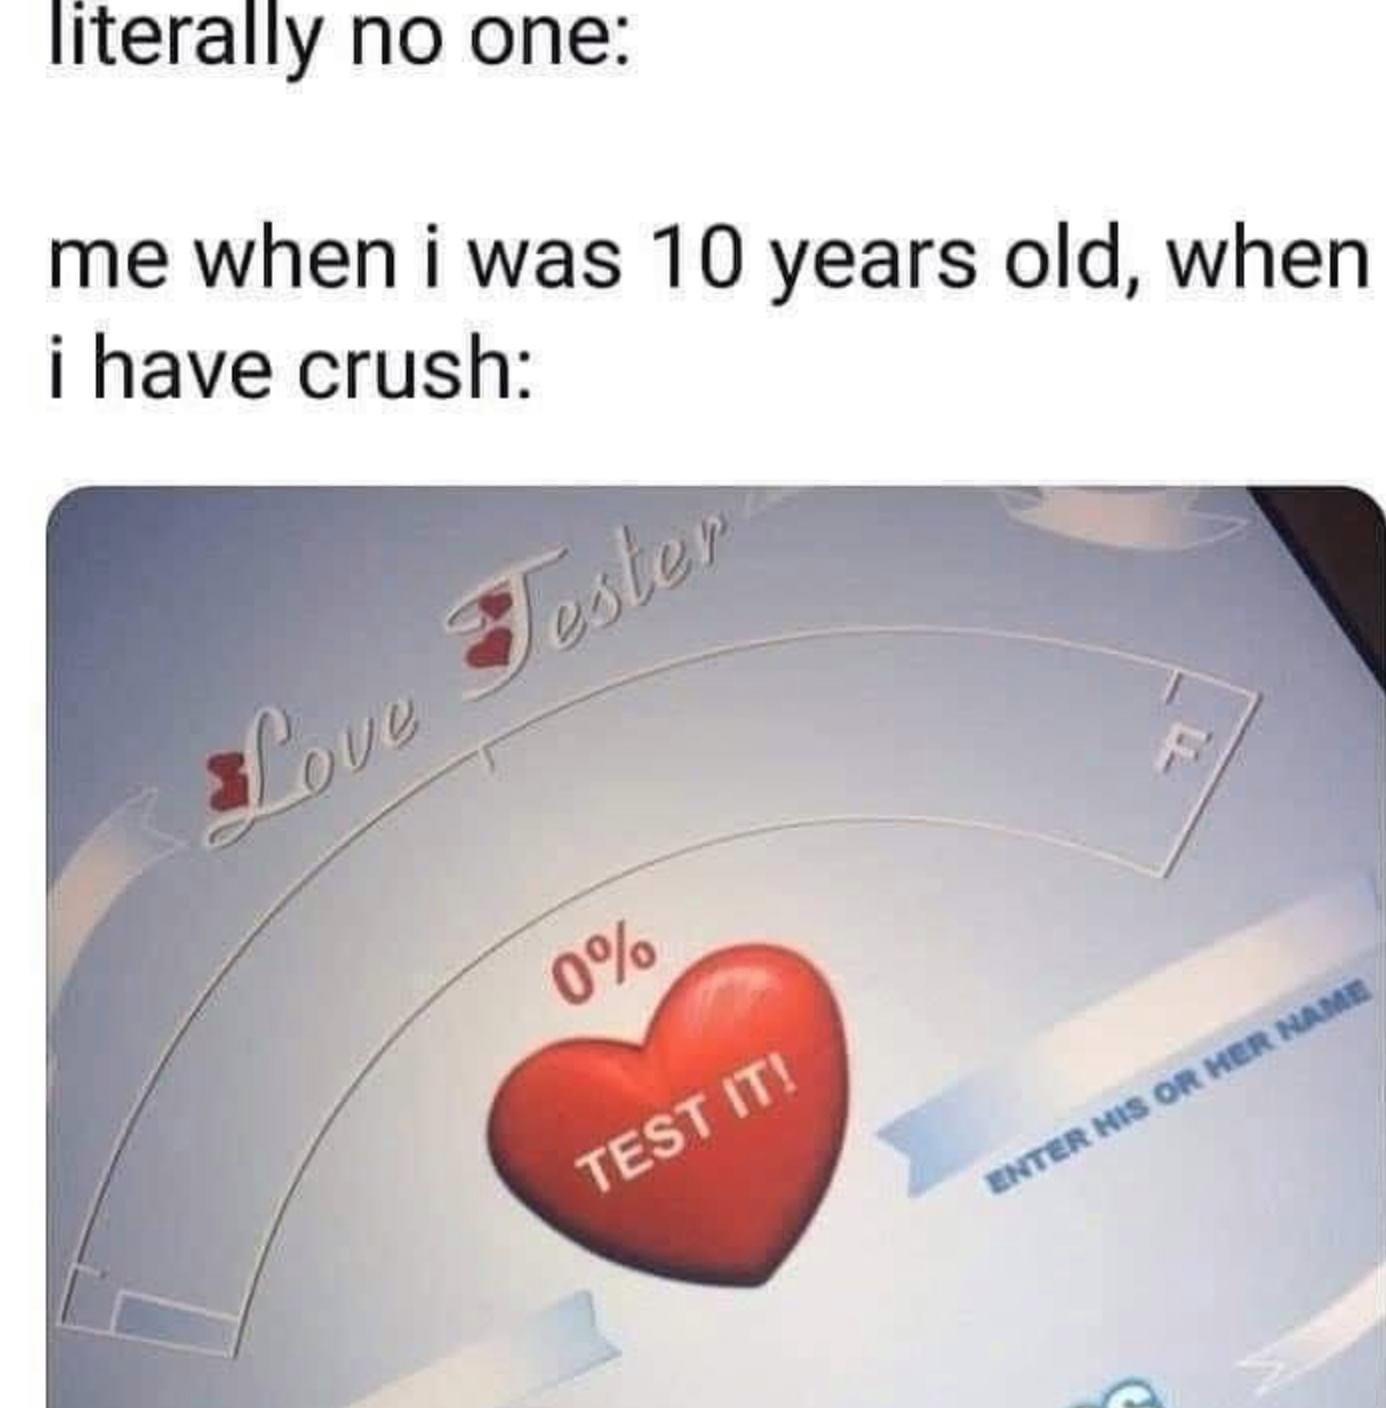 10 year old crushes - literally no one me when I was 10 years old, when i have crush Testen Love 0% Test It! Unter His Or Her Name